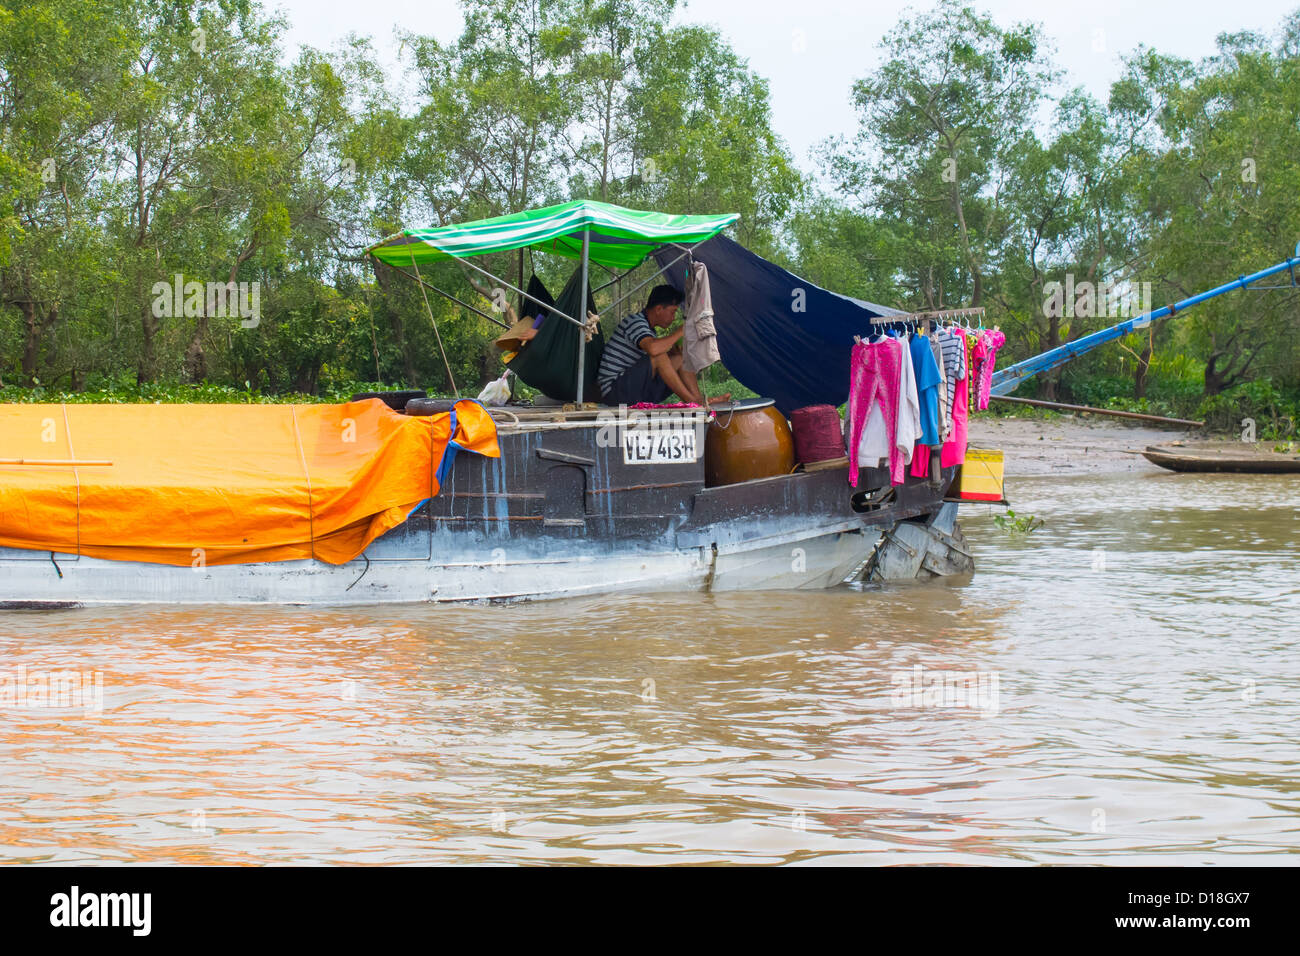 Man on a boat in the Mekong Delta region of Vietnam Stock Photo